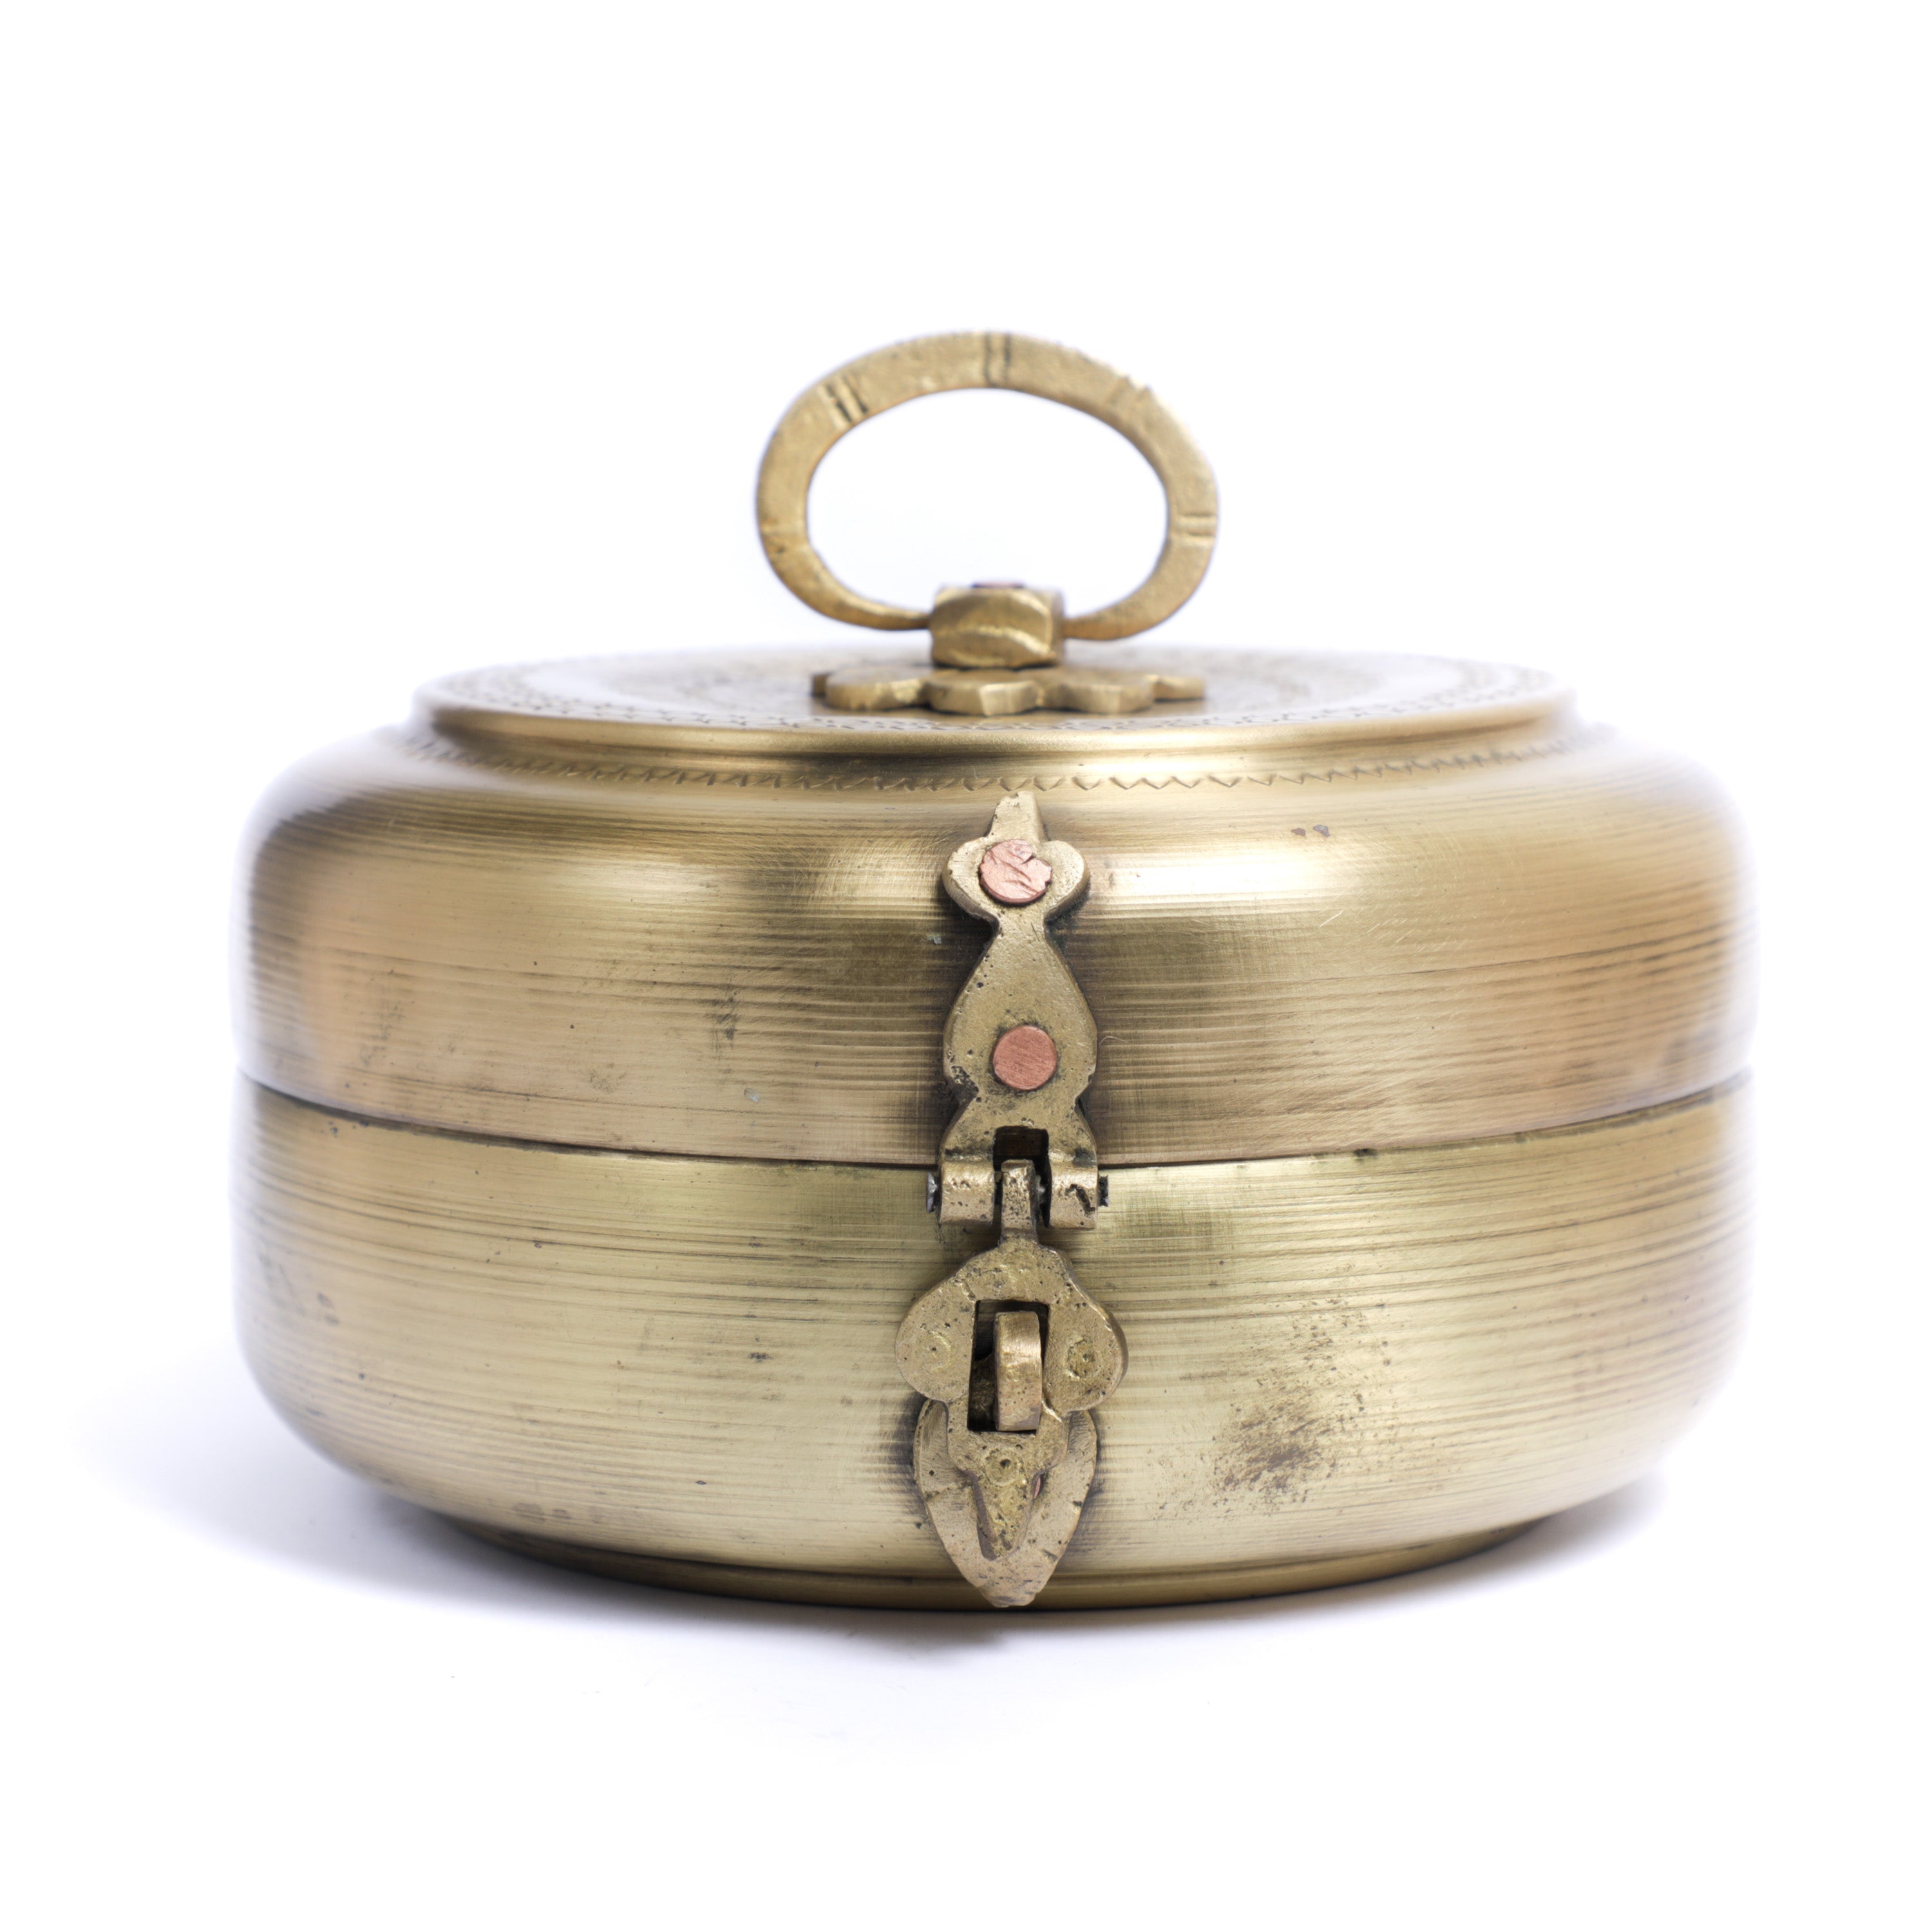 brass box with knob and handle